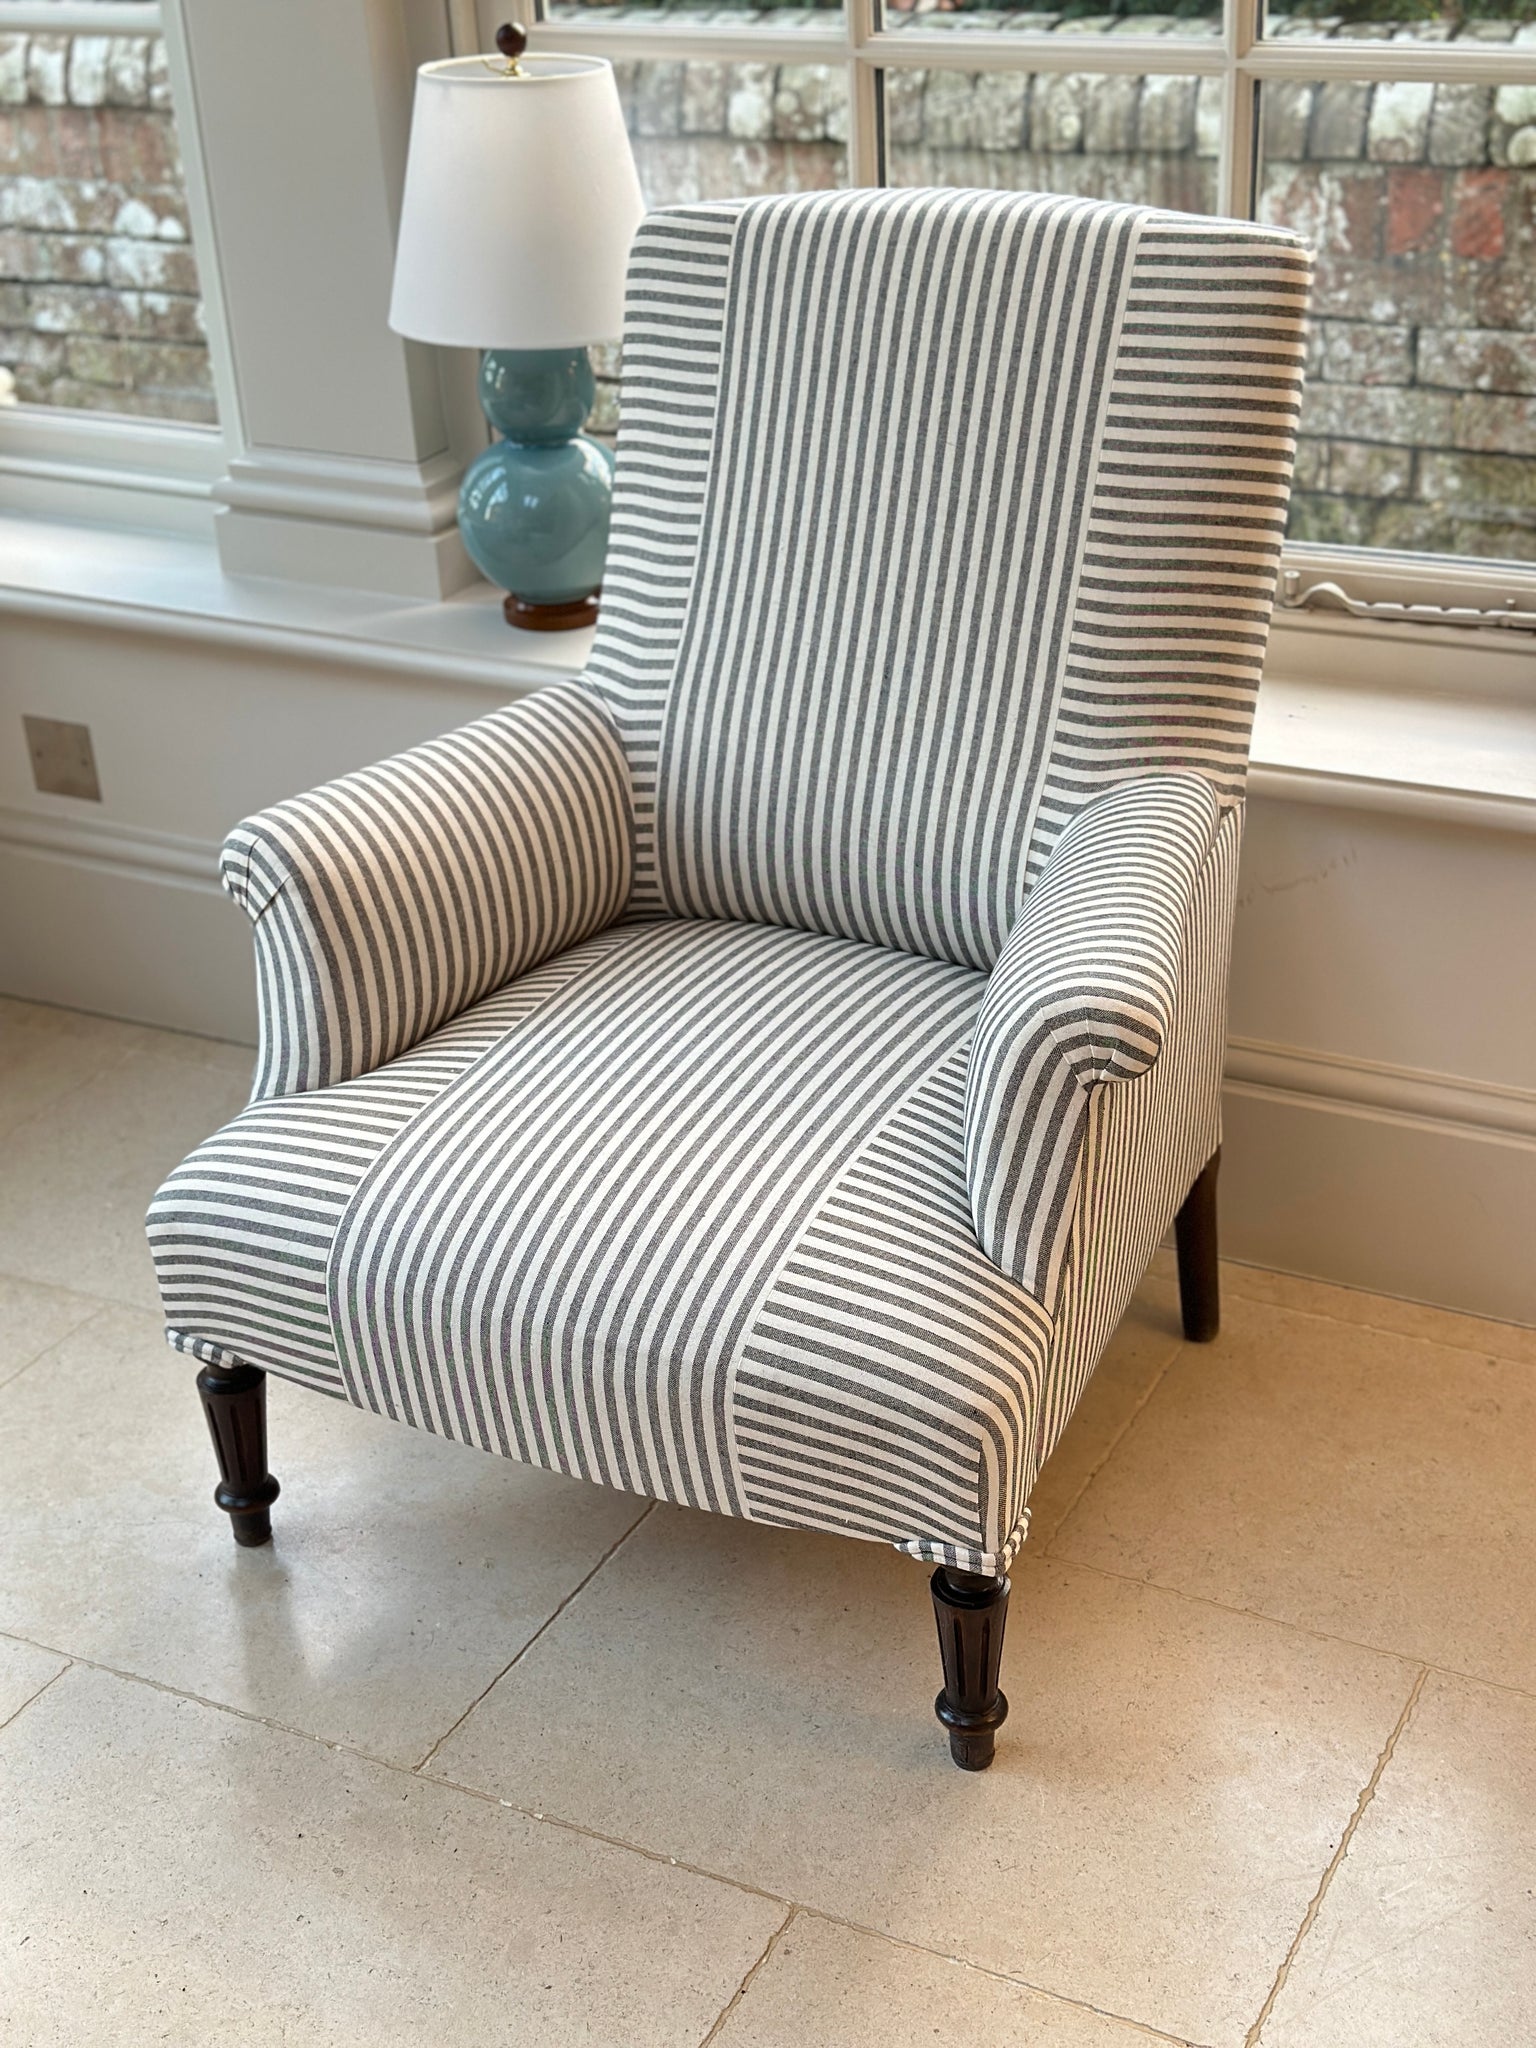 A Large Nap 3 Square Back Chair in Charcoal and White Ticking